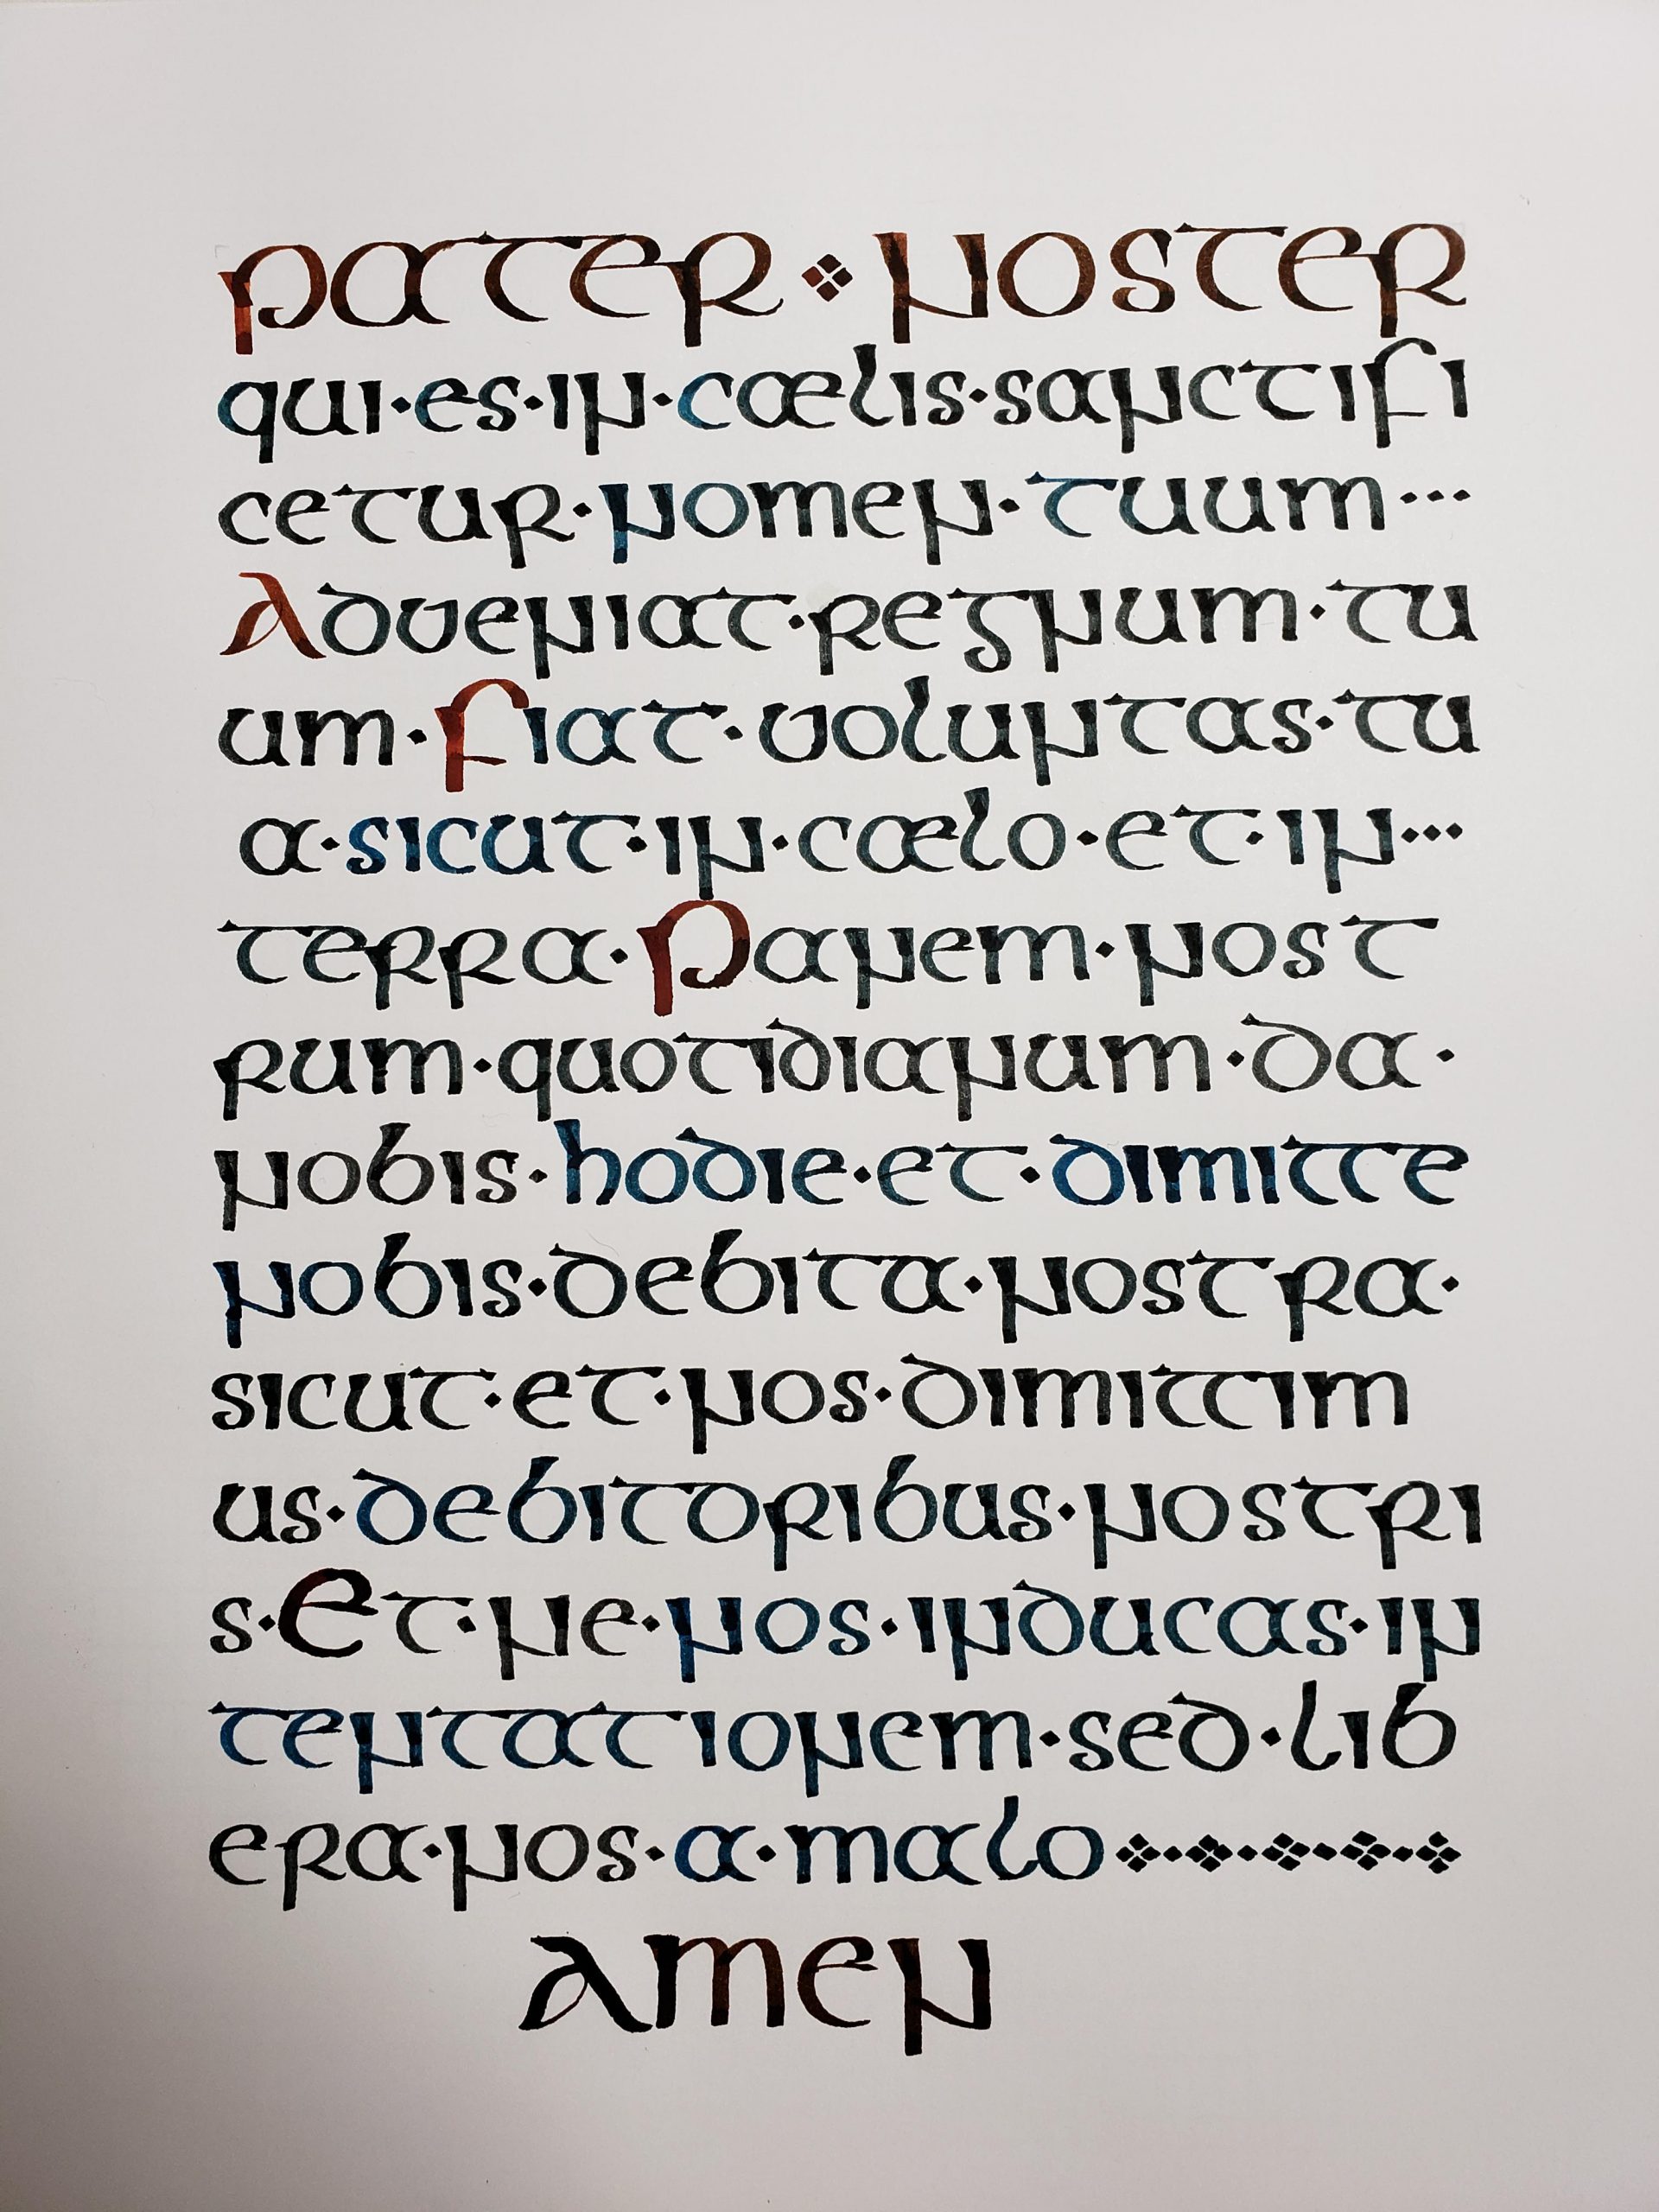 Just Finished! Pater Noster (Our Father In Latin) In Insular intérieur Majuscule Script